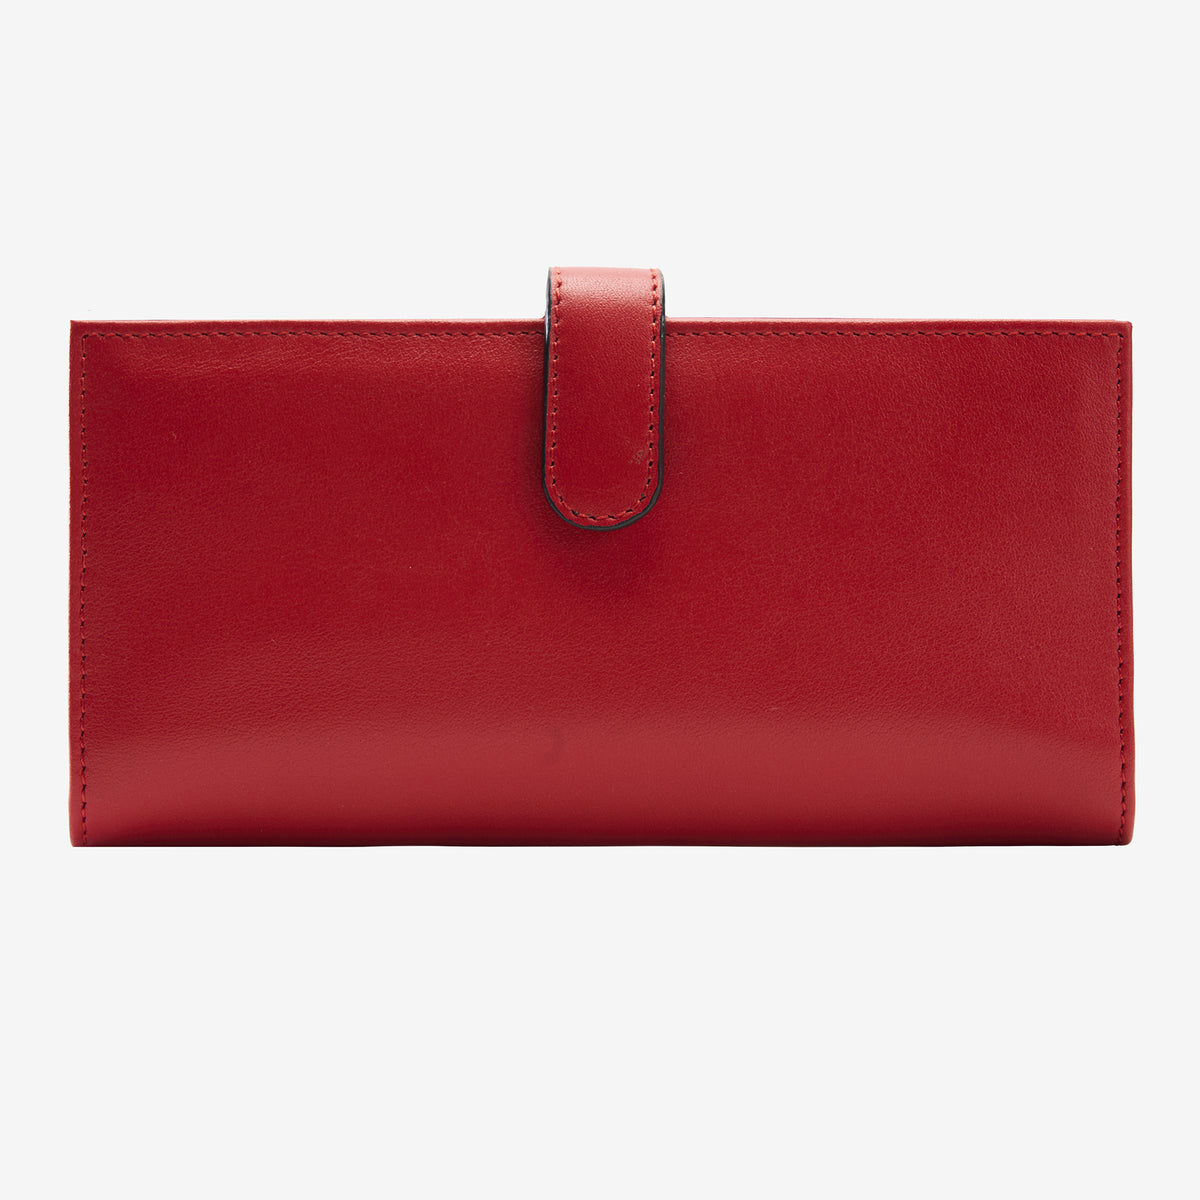 tusk-455-womens-slim-joy-leather-clutch-wallet-red-front